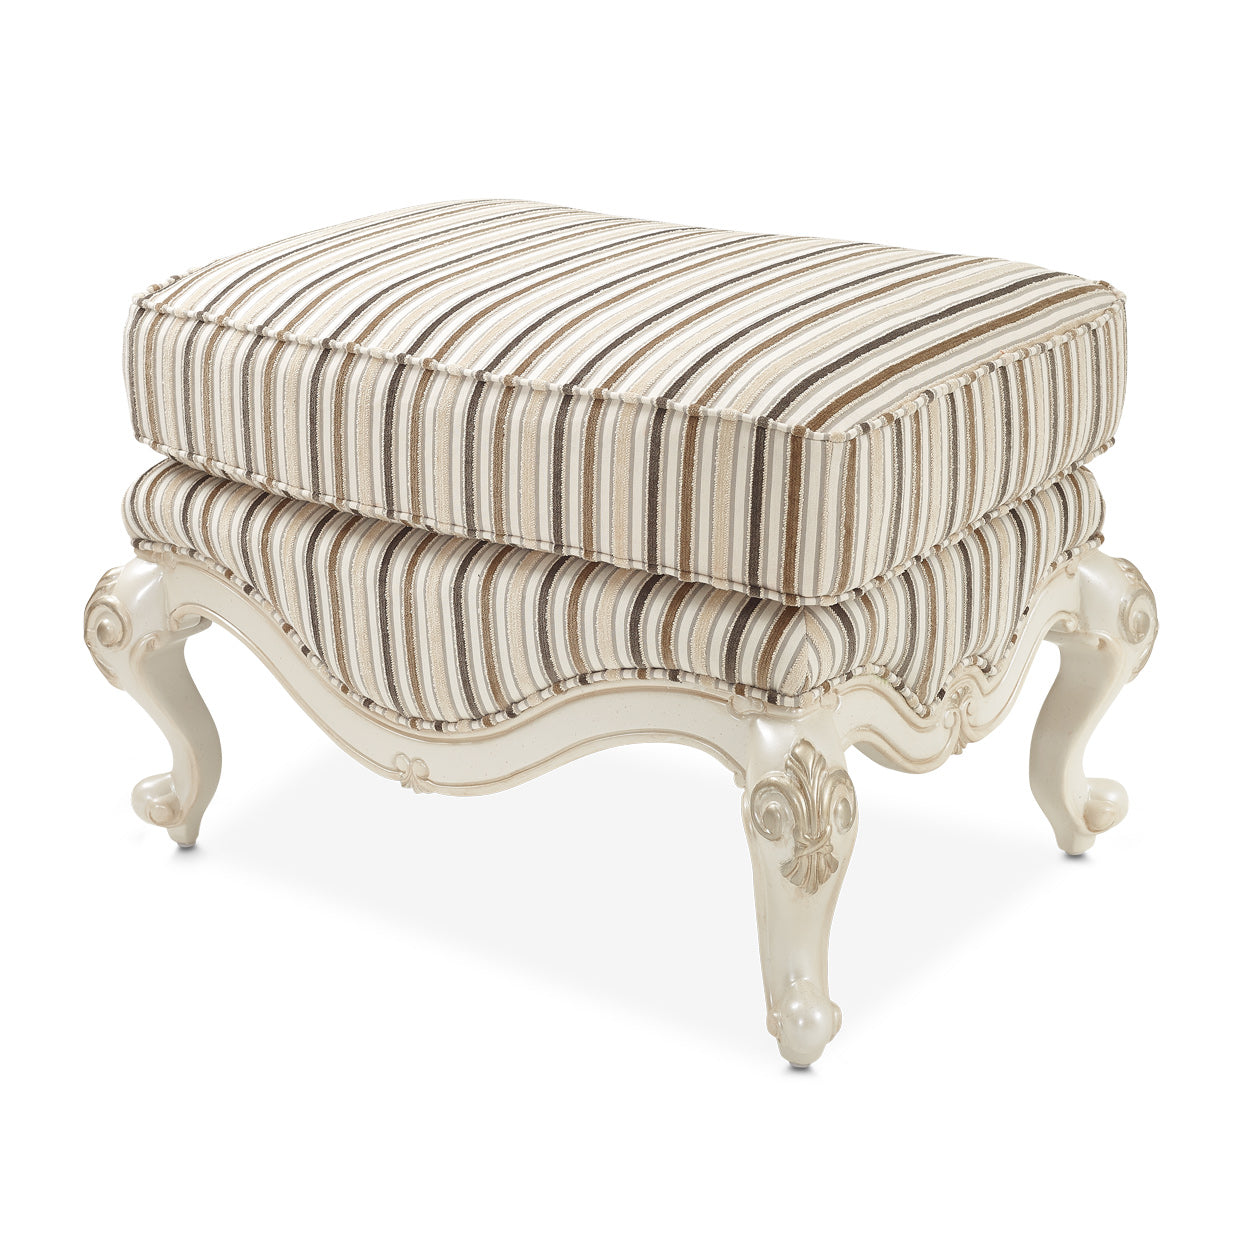 LAVELLE-CLASSIC PEARL Lavelle Wood Chair Ottoman Birch Classic Pearl - Dream art Gallery